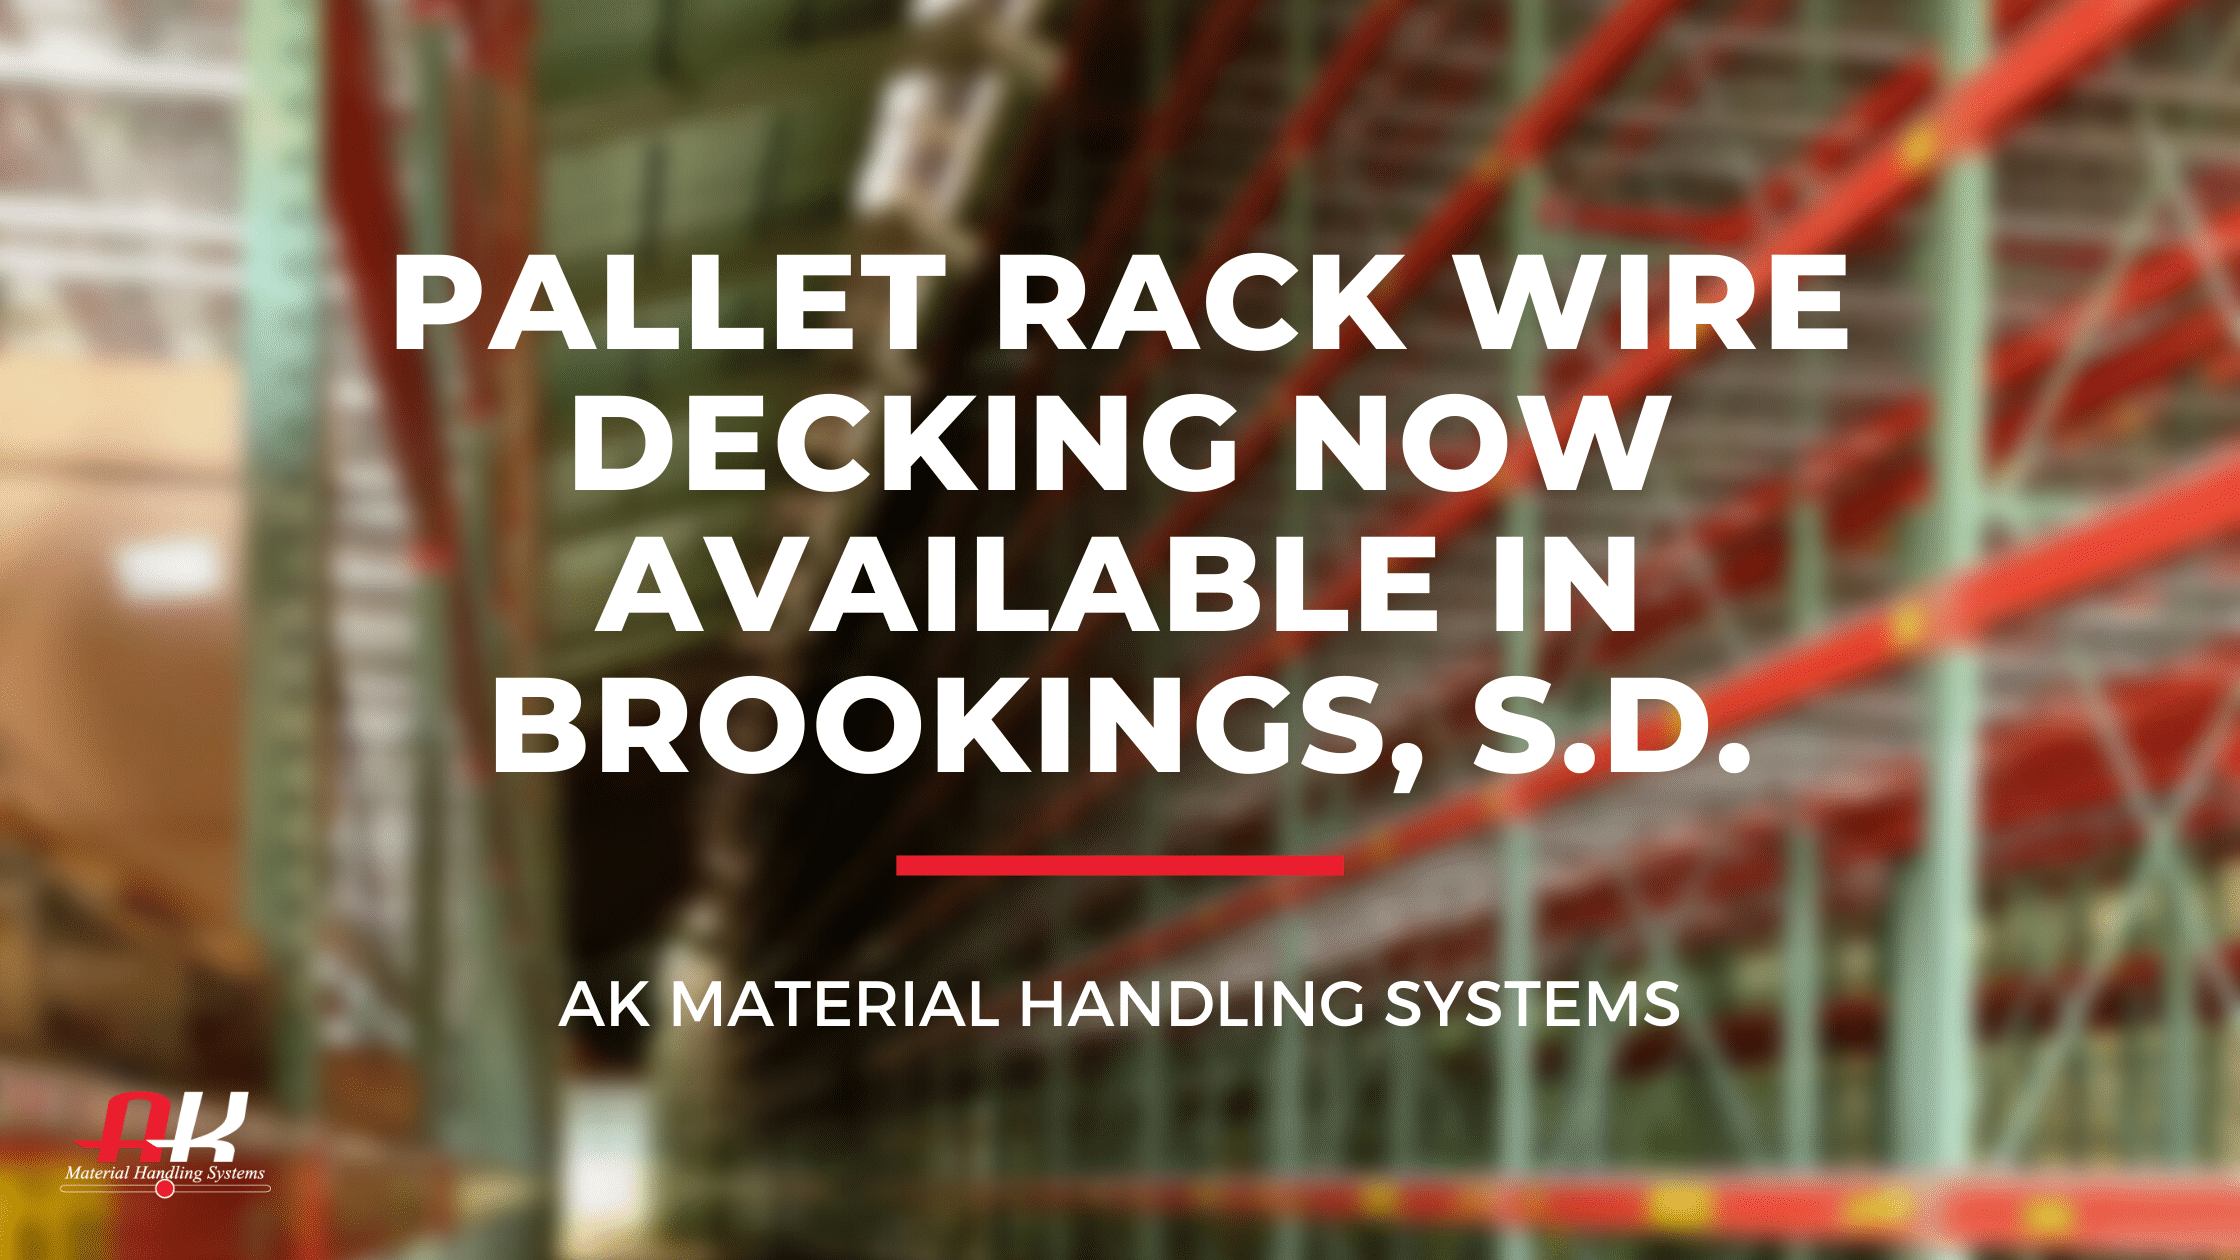 Pallet Rack wire decking now available in Brookings, s.d.